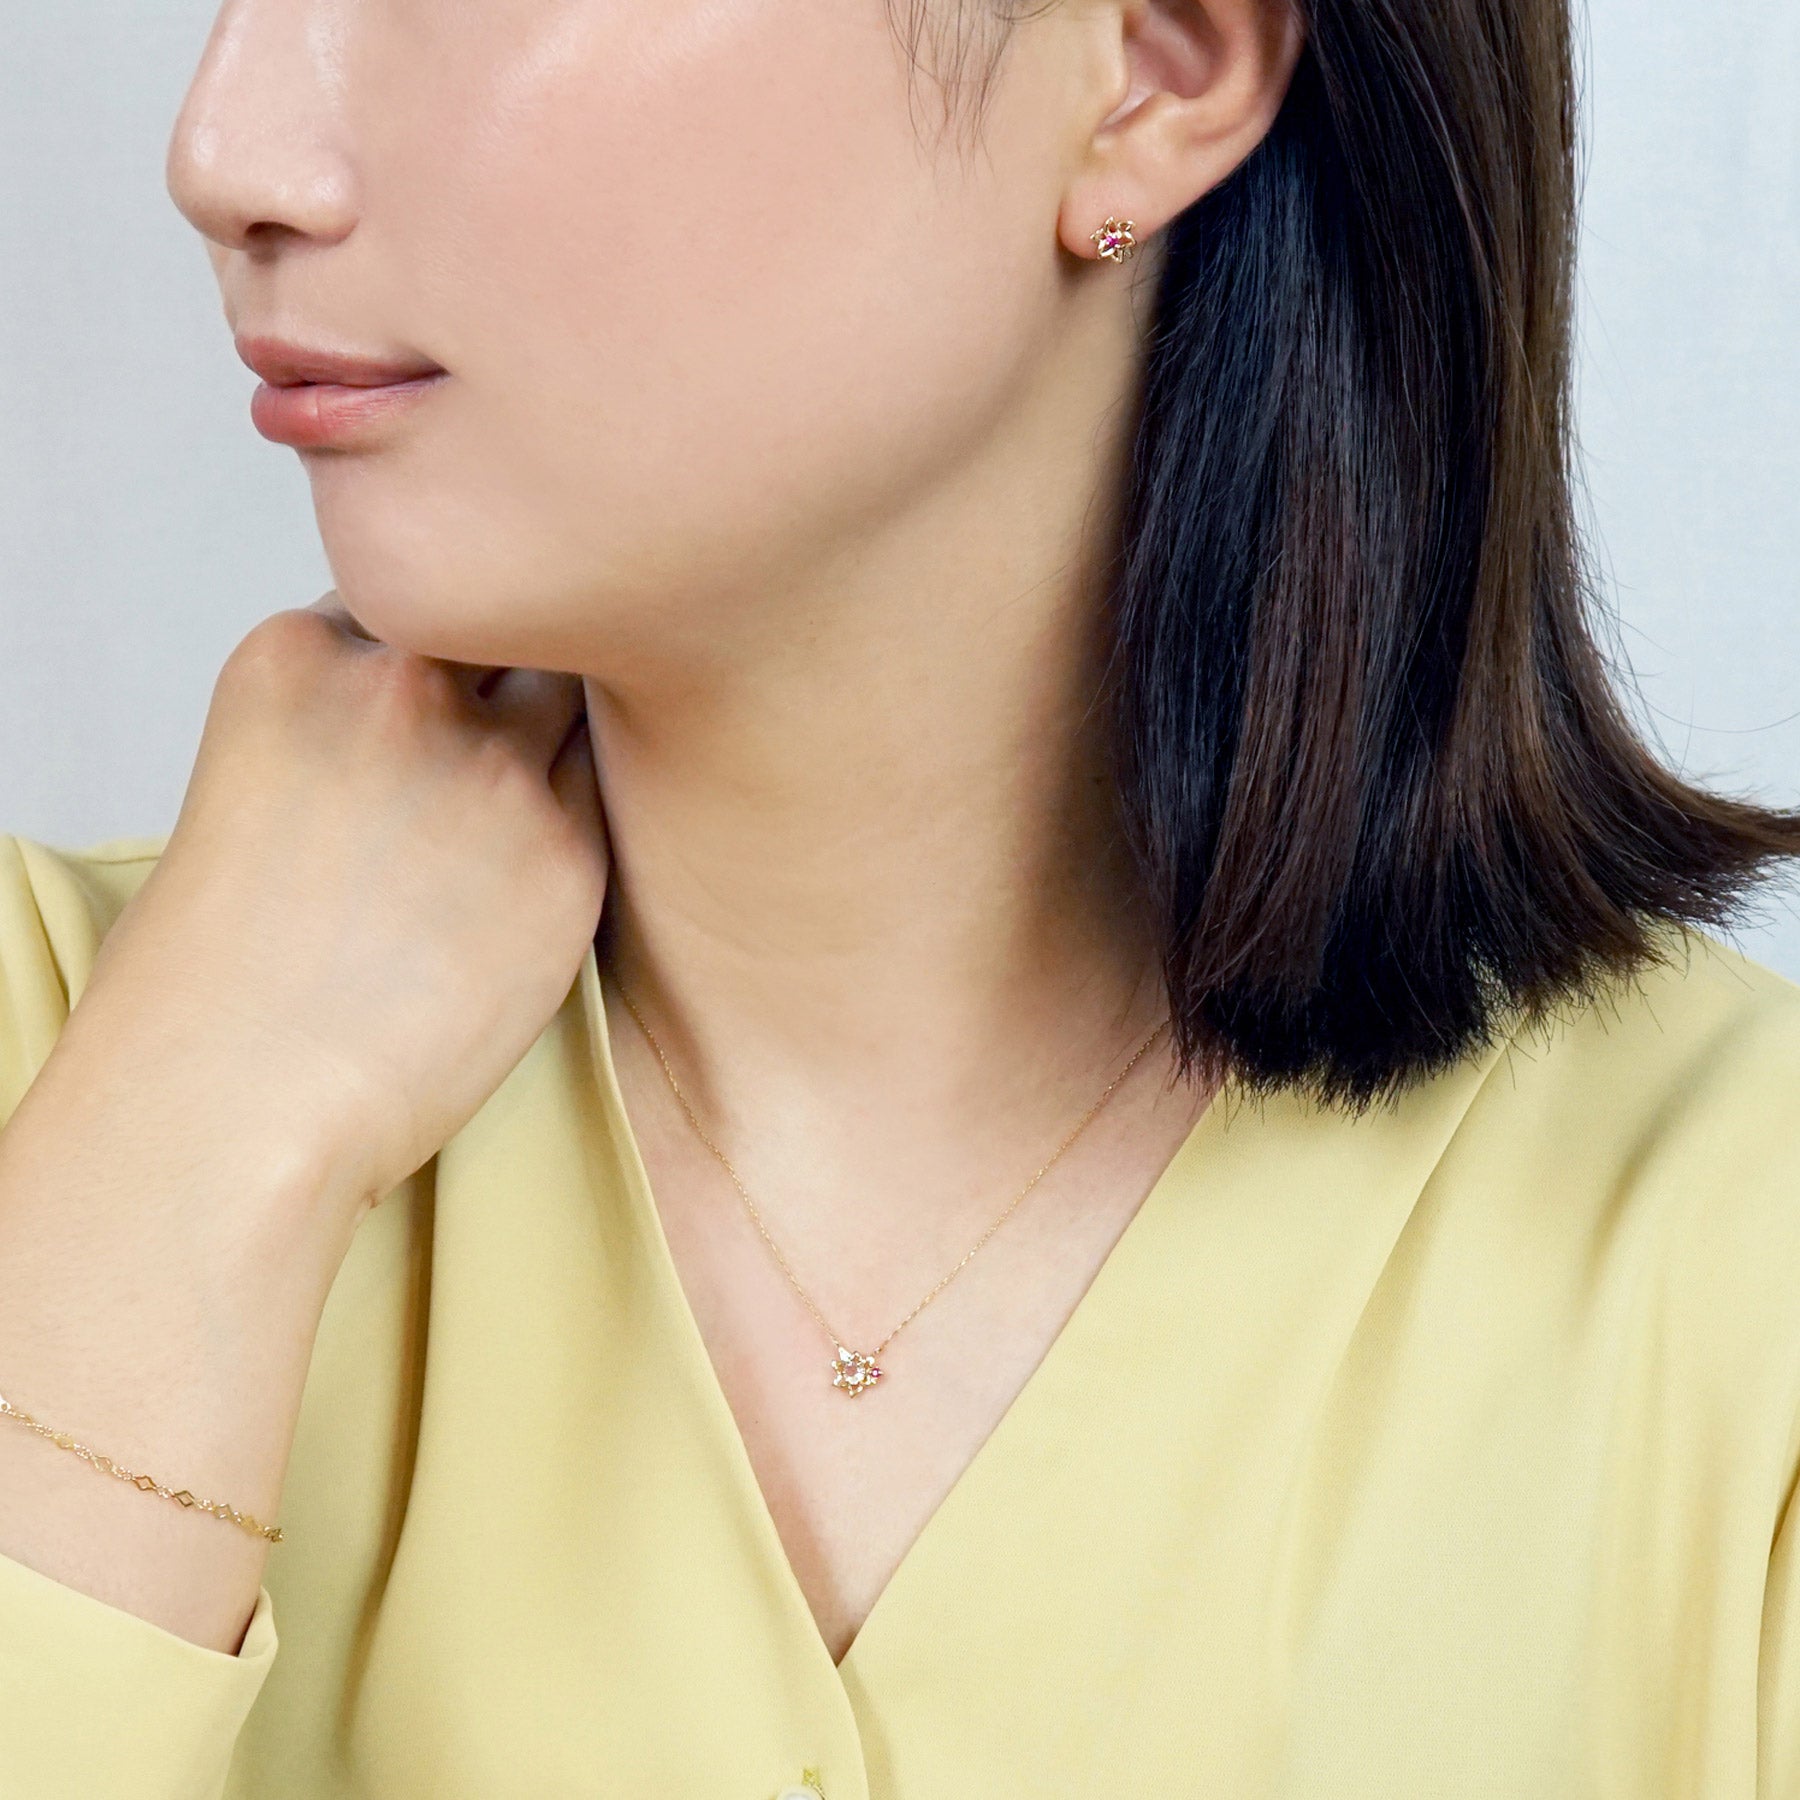 [Birth Flower Jewelry] July - Lily Openwork Necklace (10K Yellow Gold) - Model Image